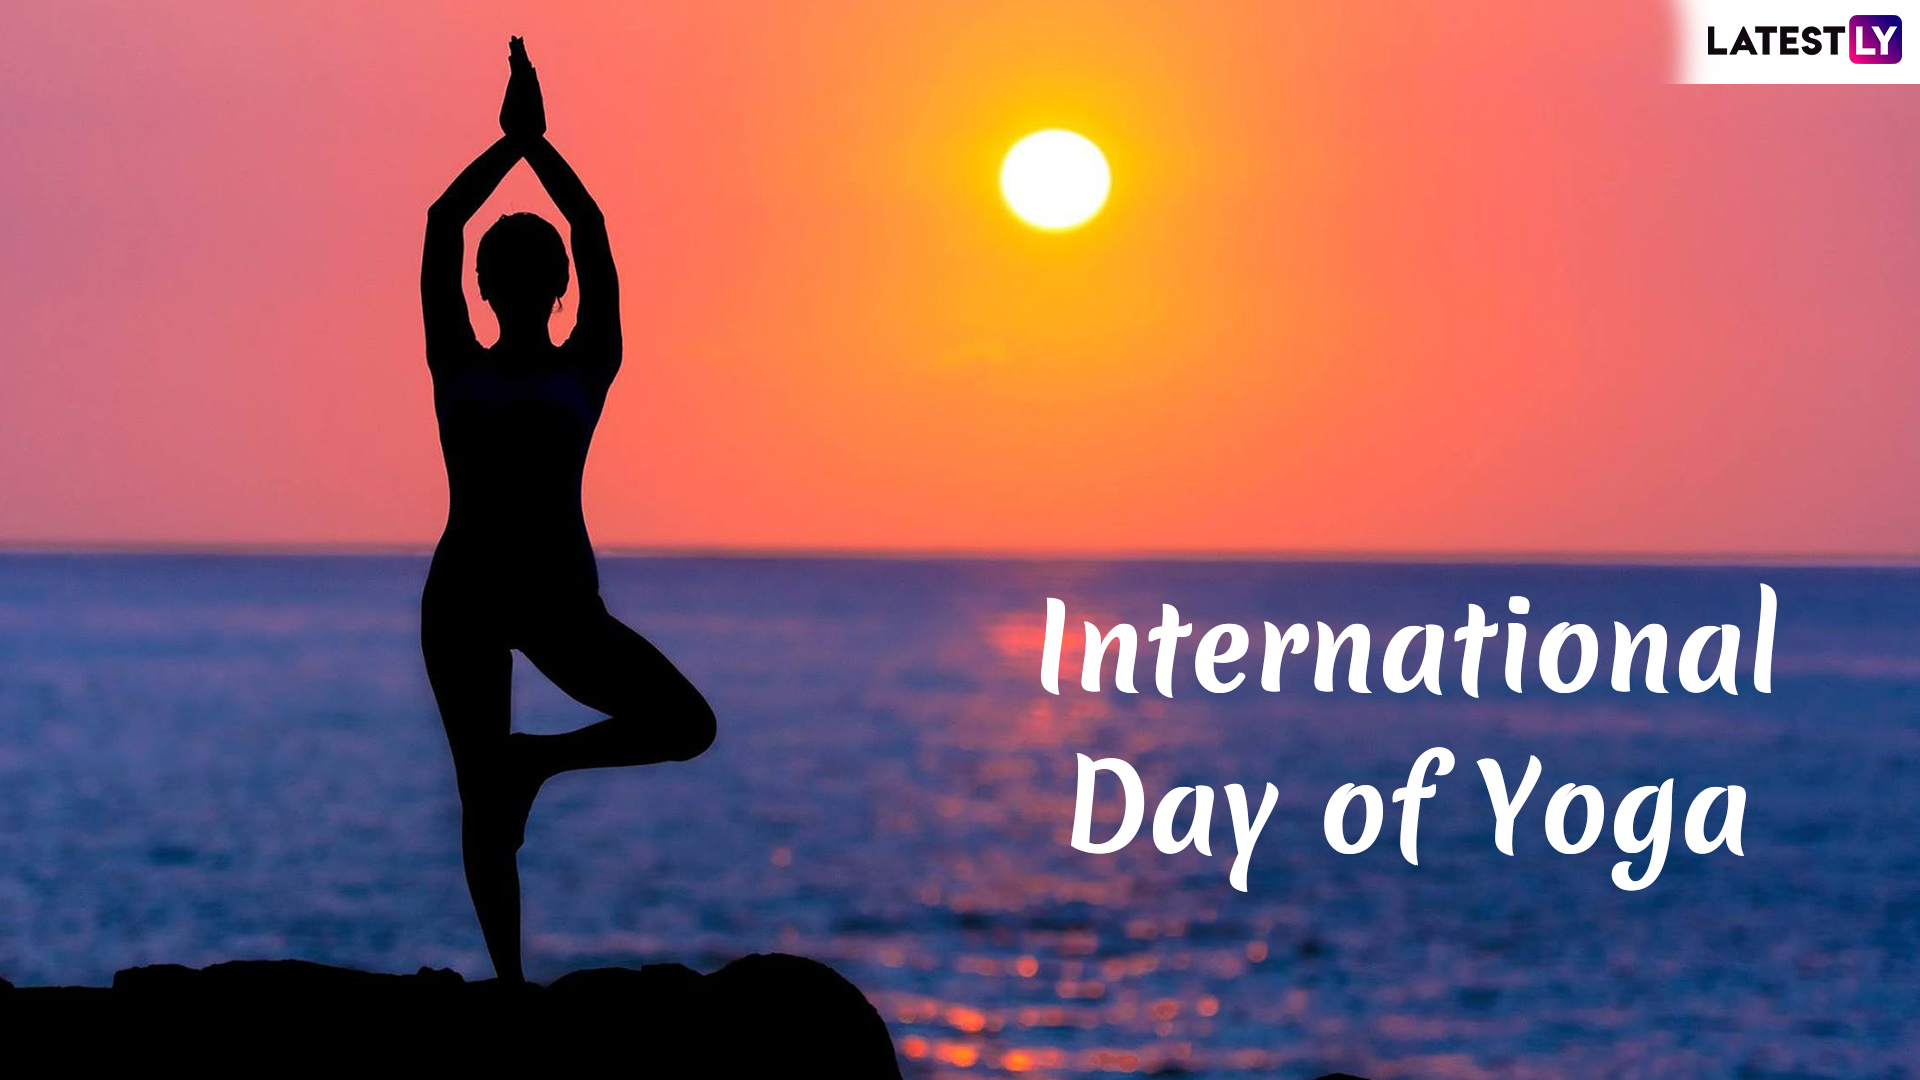 Motivational Yoga Quotes To Celebrate International Yoga Day – RBX Active